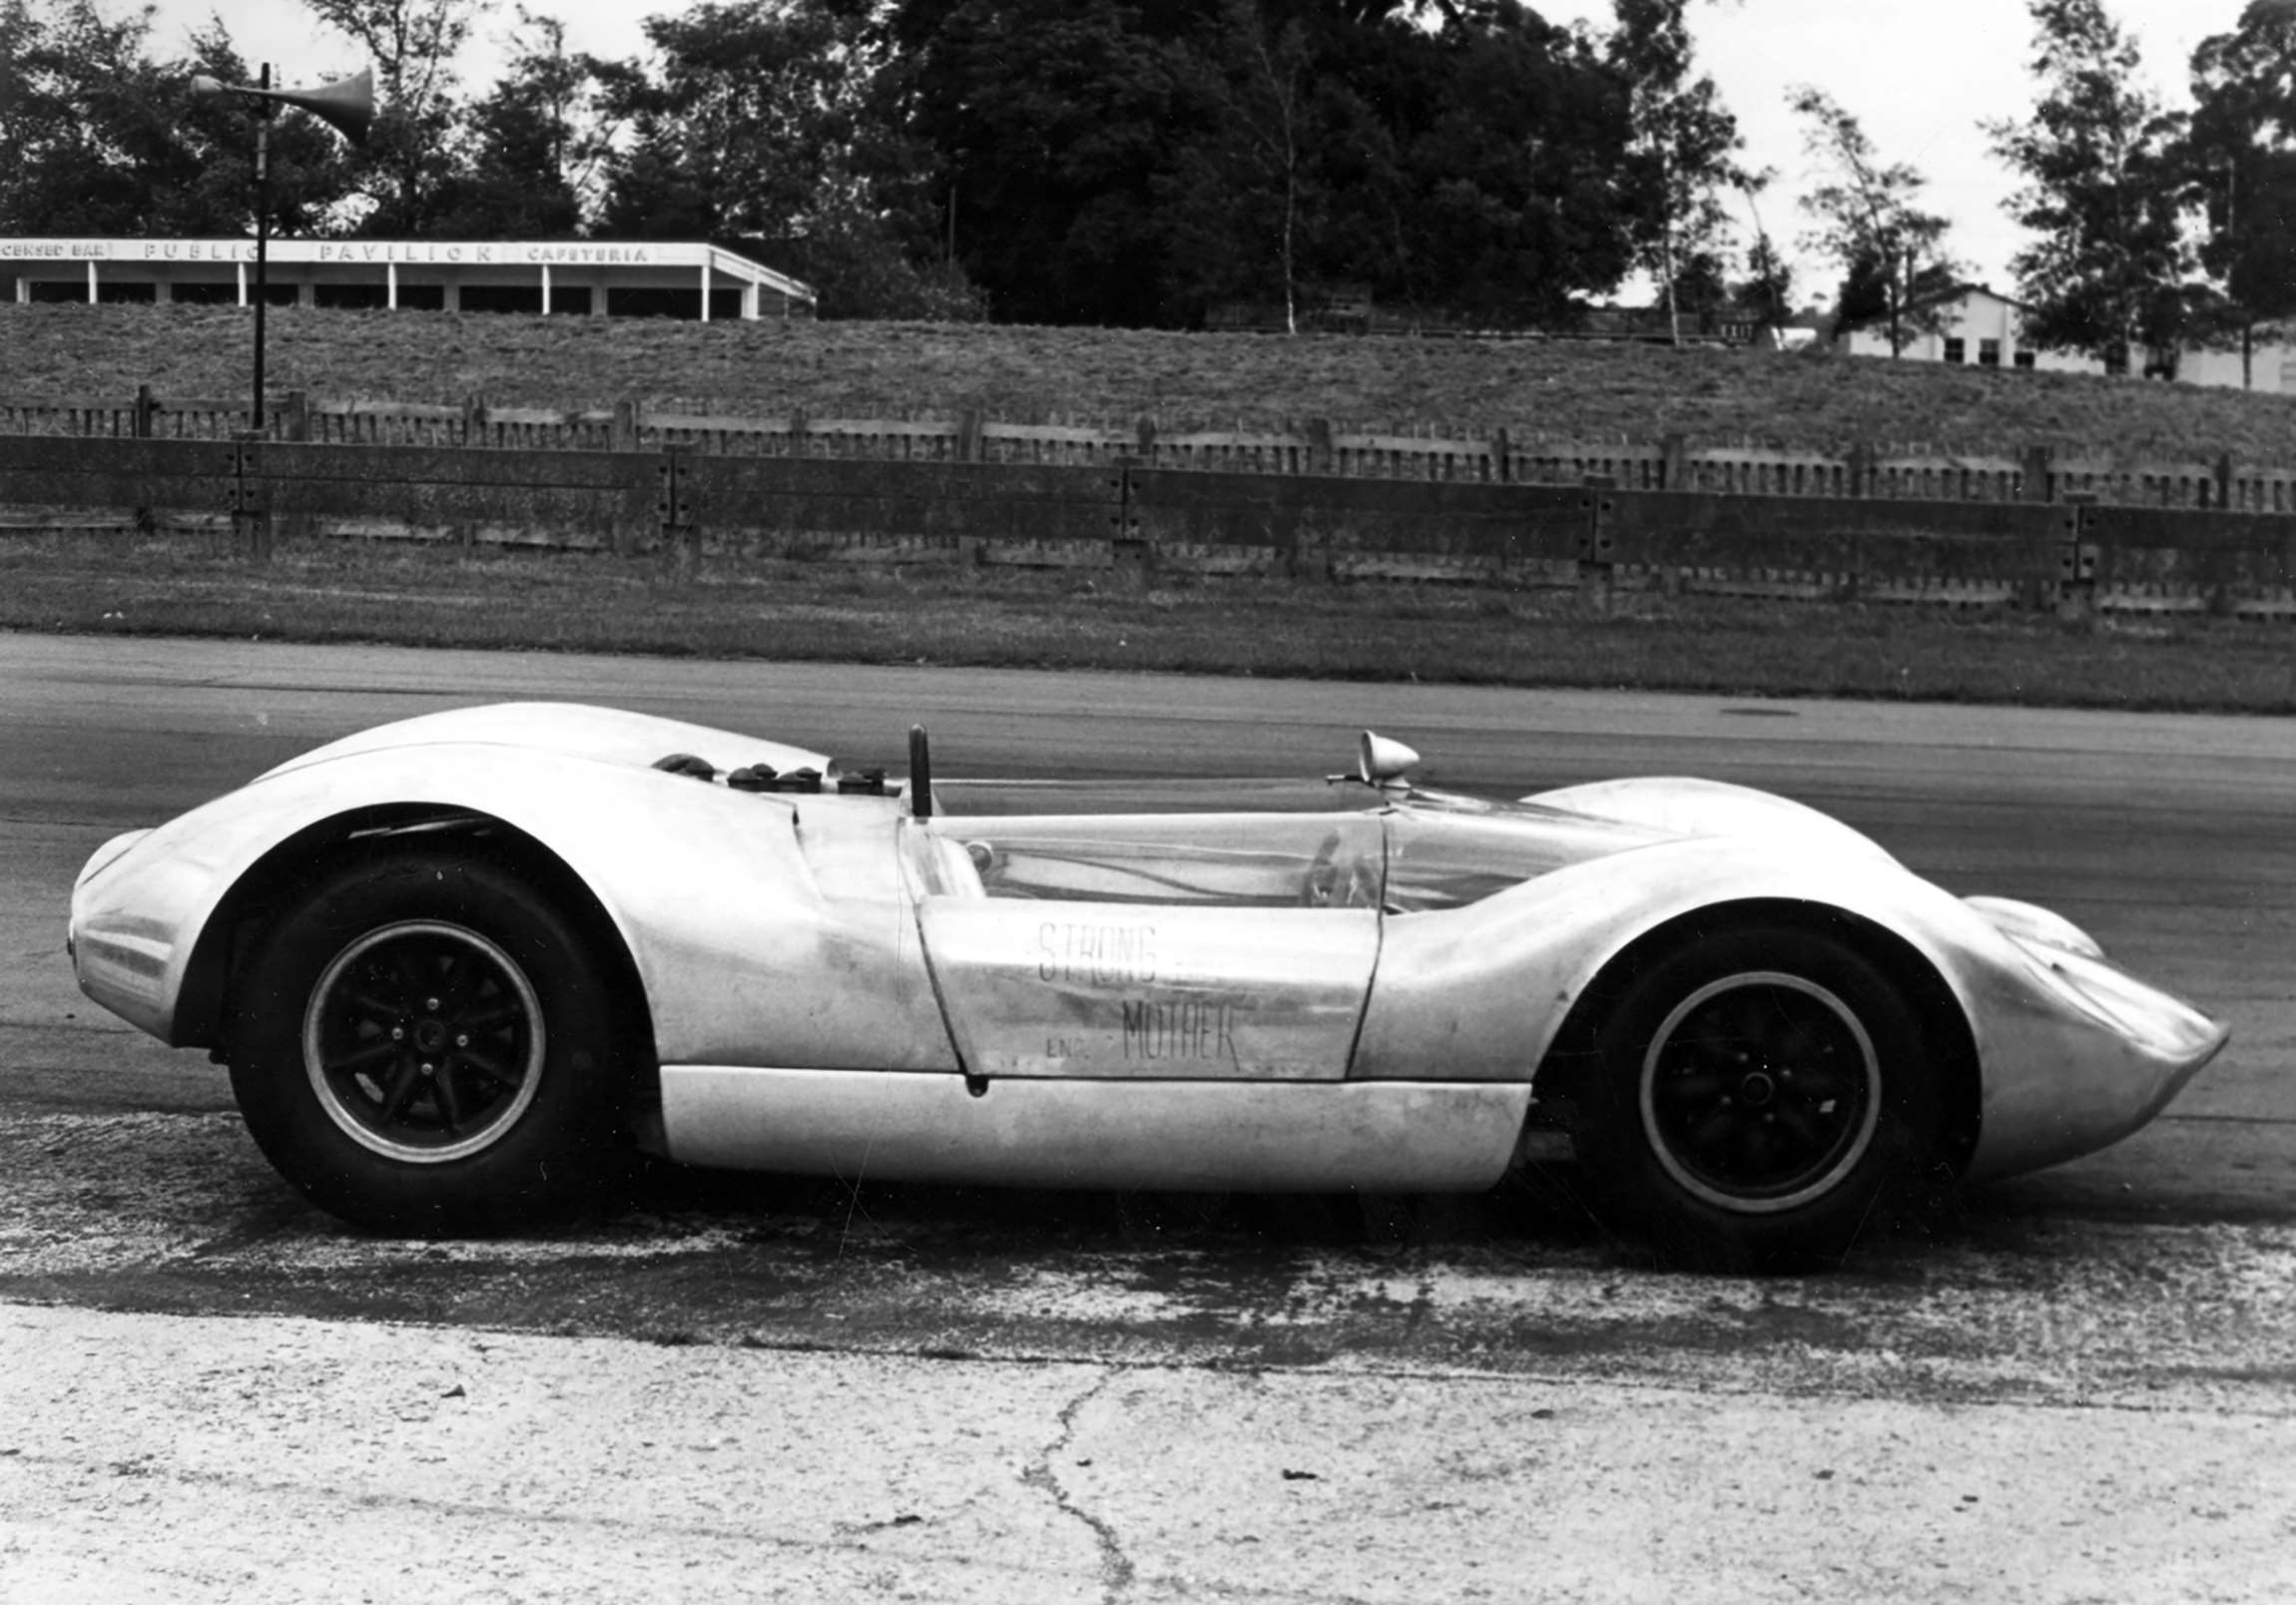 Sleek Tony Hilder-styled bodywork of the prototype McLaren ‘Strong Mother’ unpainted but ready to rumble - Goodwood 1964